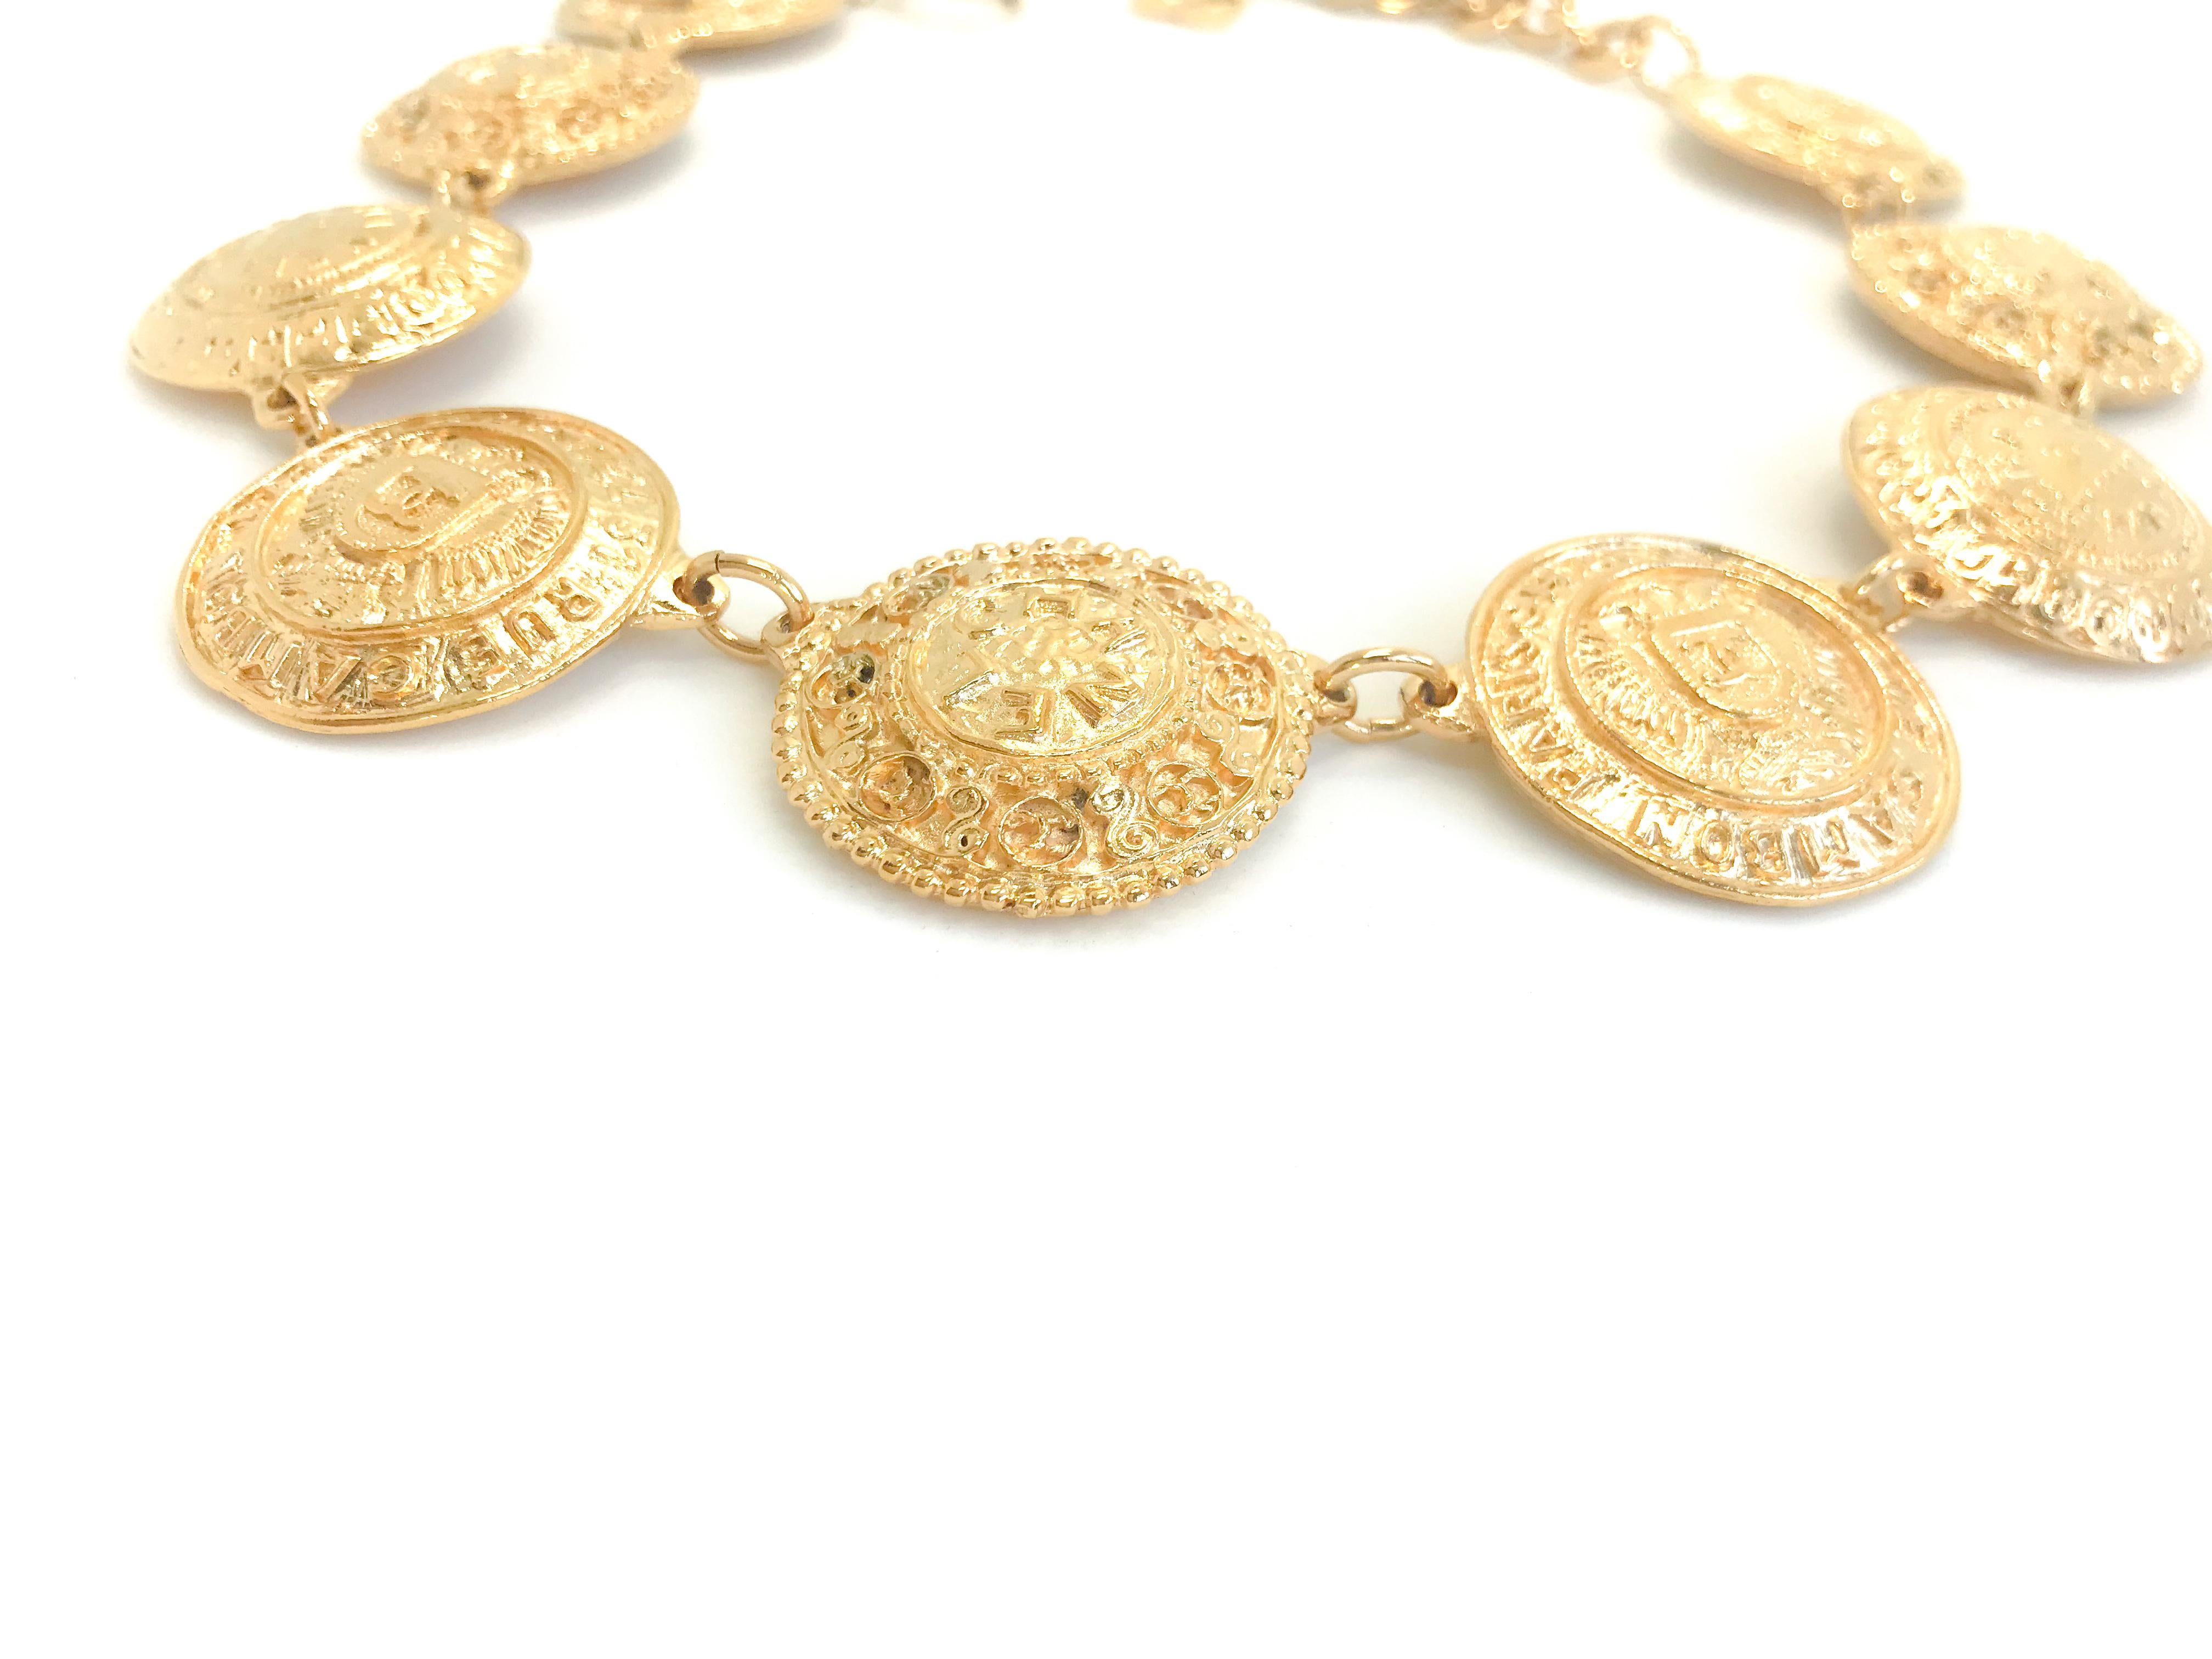 Chanel 1980s Vintage Medallion Necklace

CHANEL 31 Rue Cambon Paris CC Medallion Gold Plated Necklace.

This stunning necklace is collar length with antique Chanel medallions. Classic 80s chanel collectors item from the Victoire de Castellane